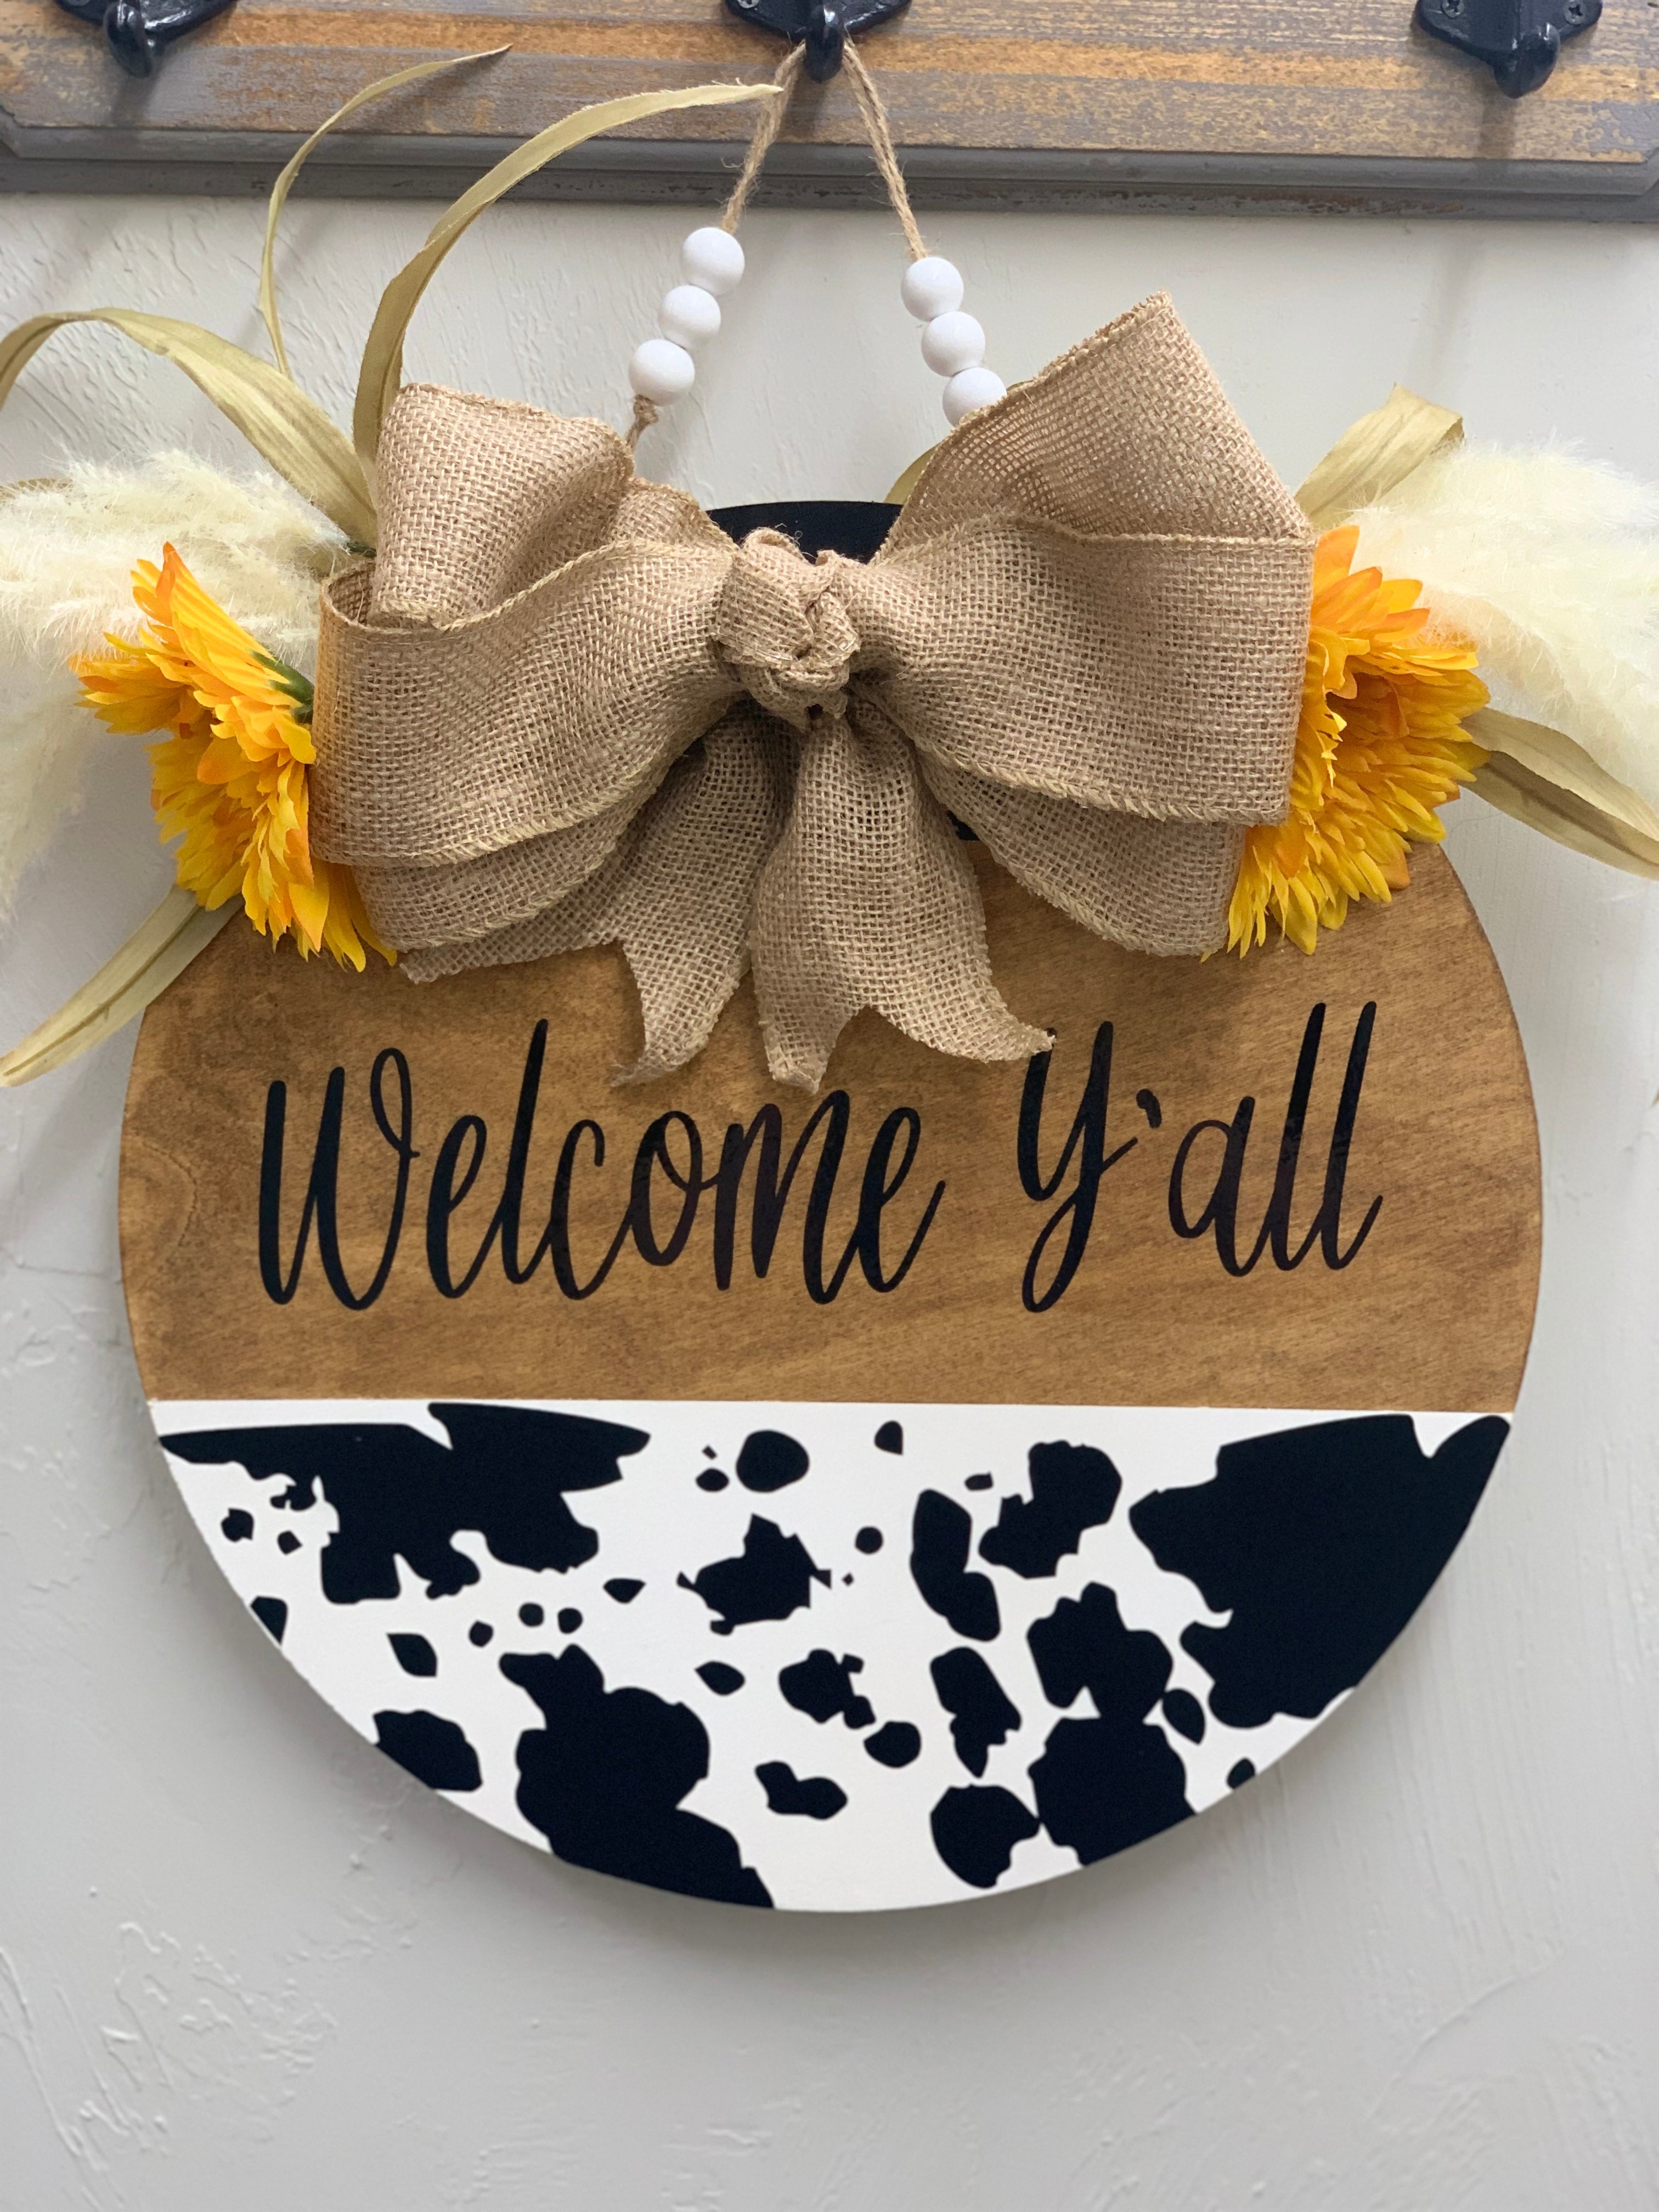 Welcome y’all round sign